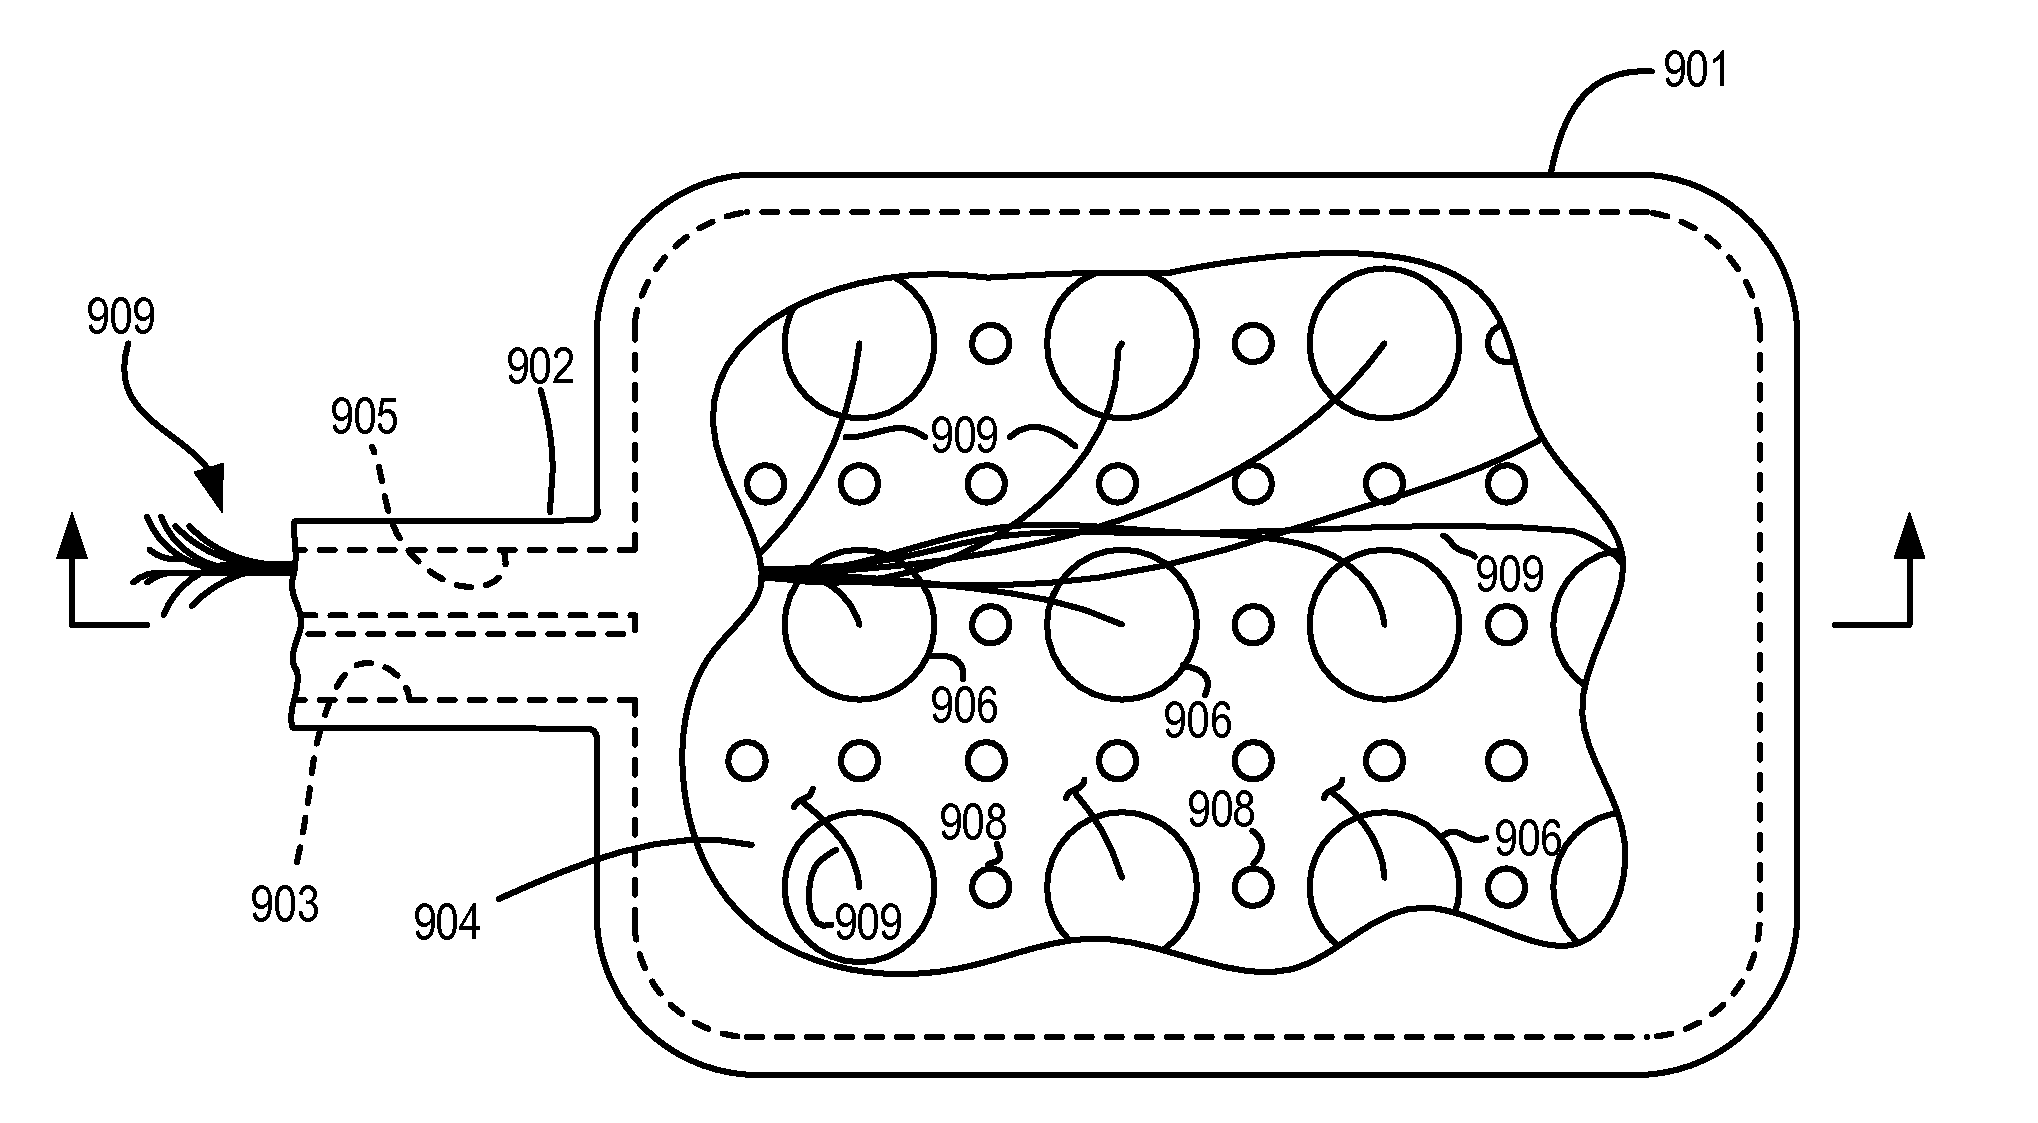 Devices, Systems and Methods for Ophthalmic Drug Delivery